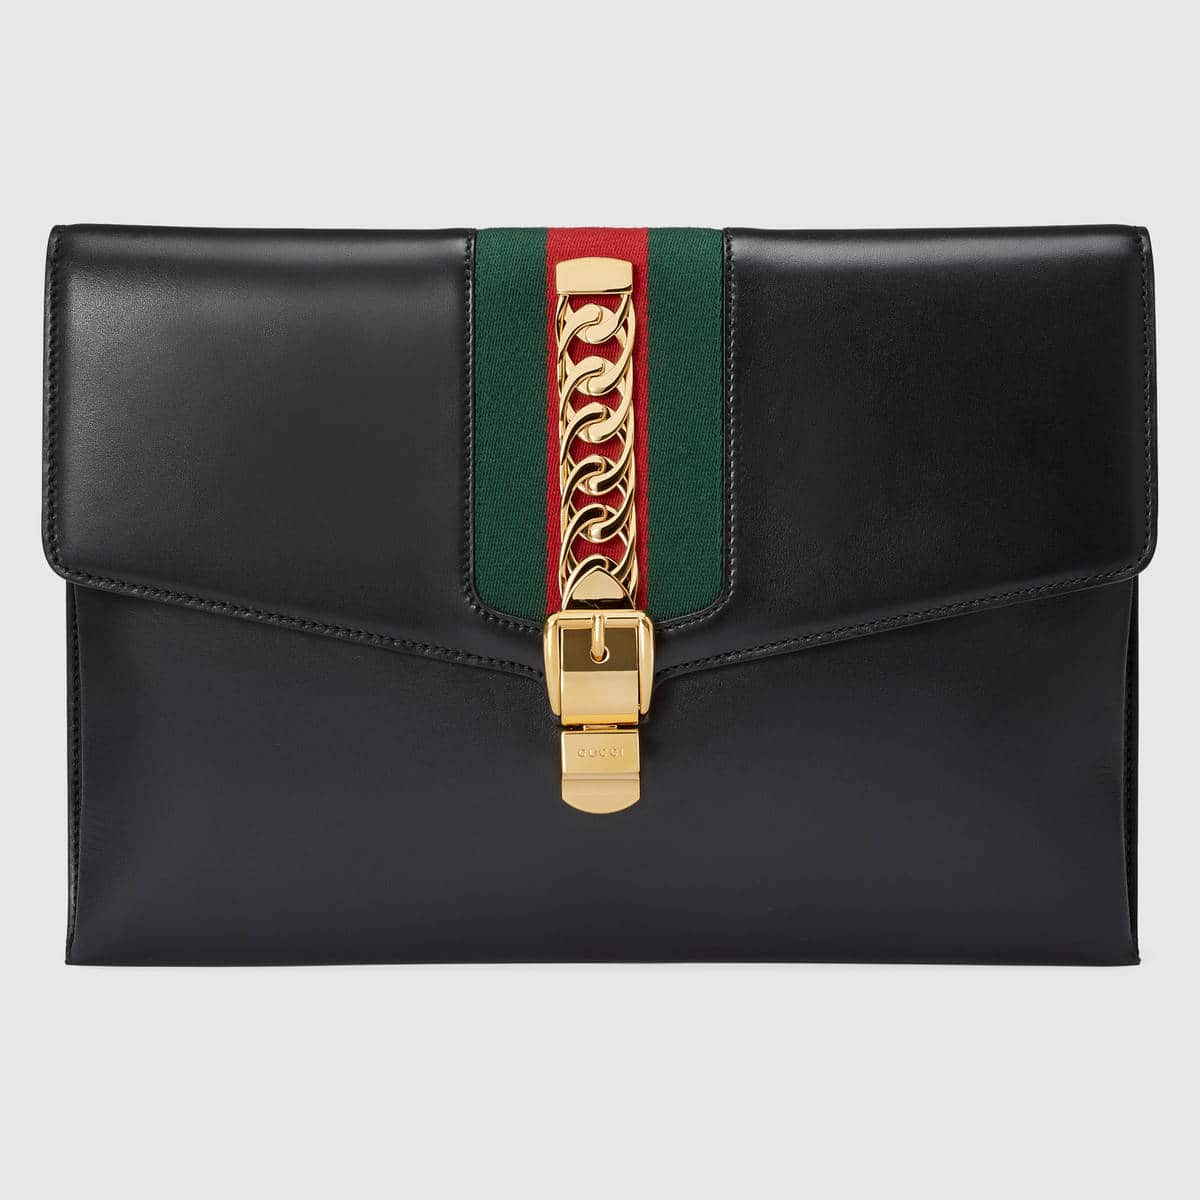 Gucci Bag Price List Reference Guide | Spotted Fashion